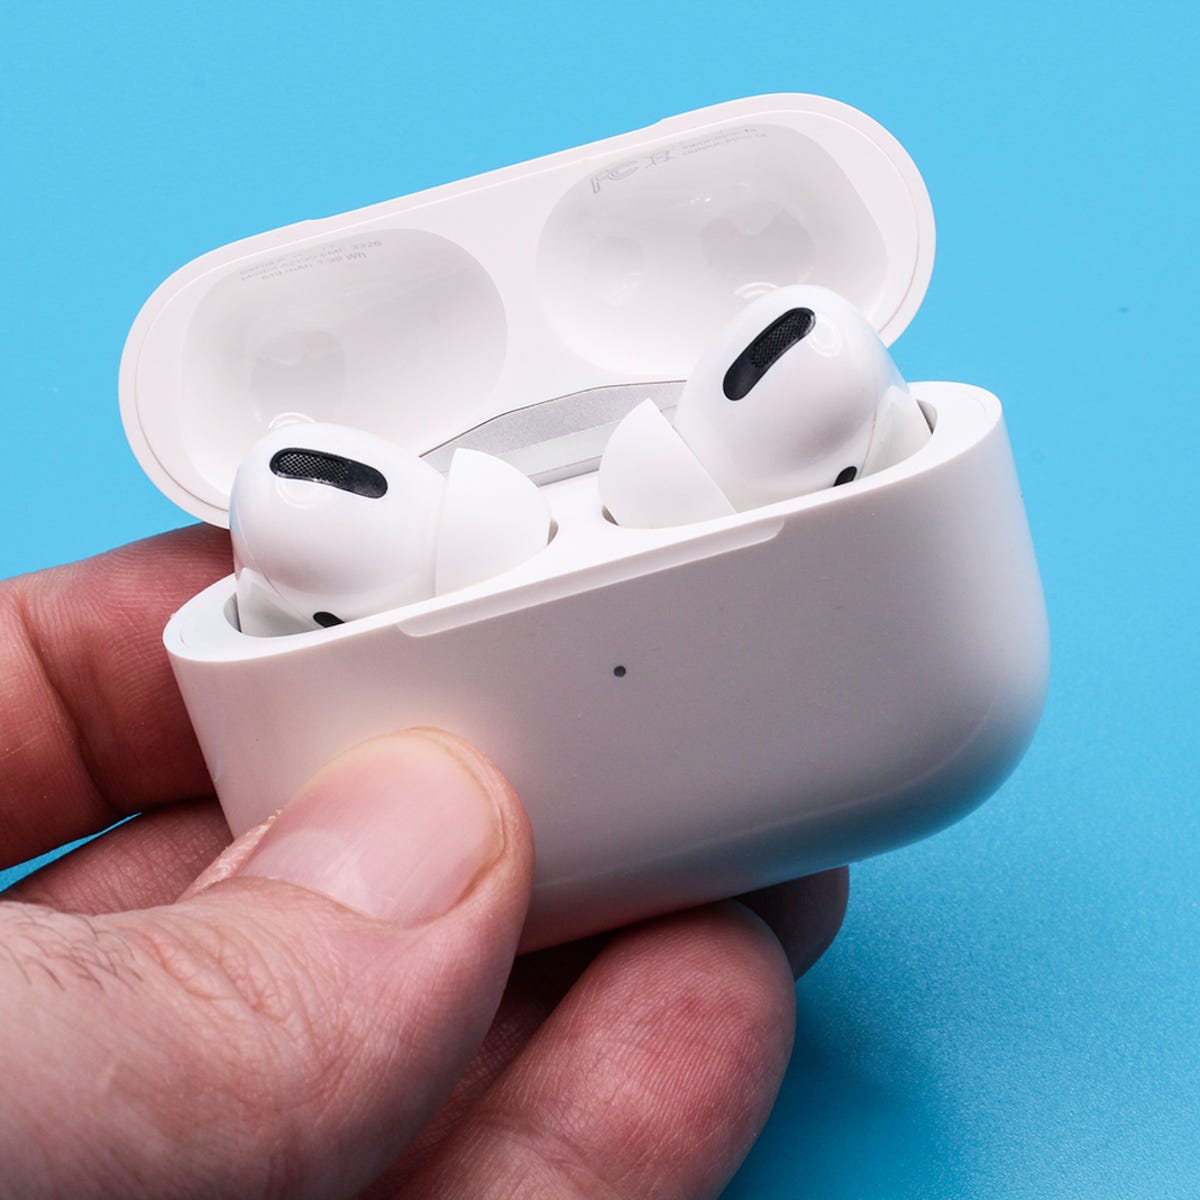 How to connect your AirPods to an iPhone just about any other device) |